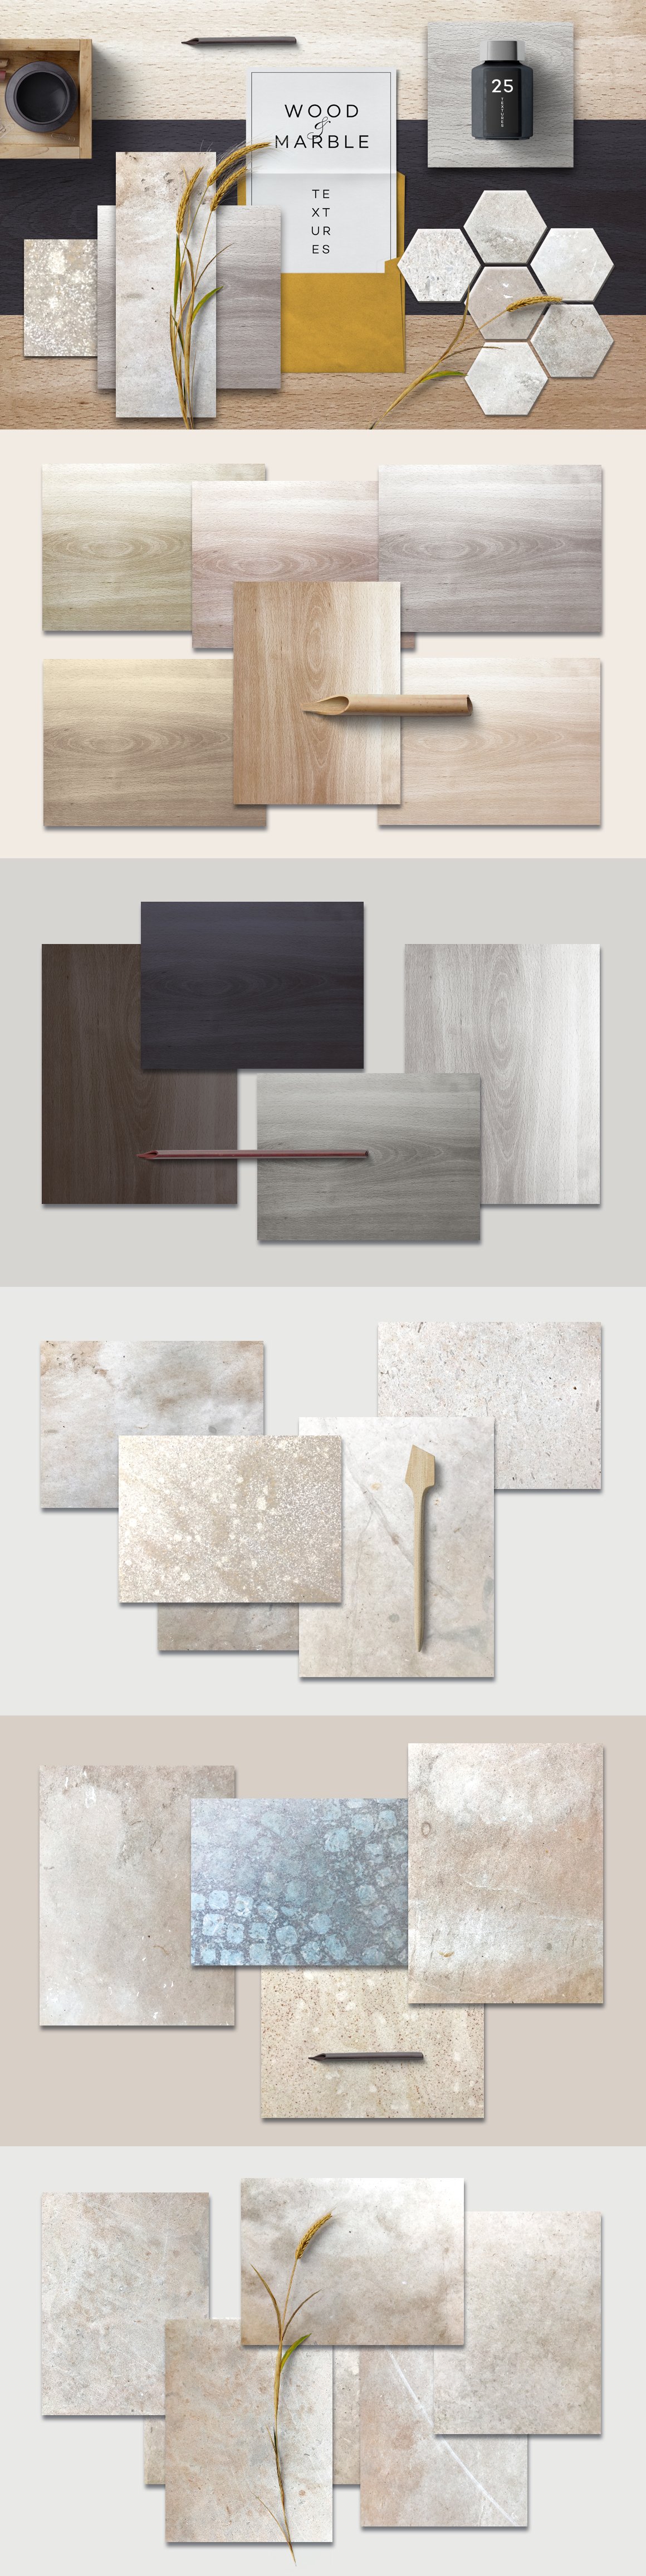 Wood & Marble textures cover image.